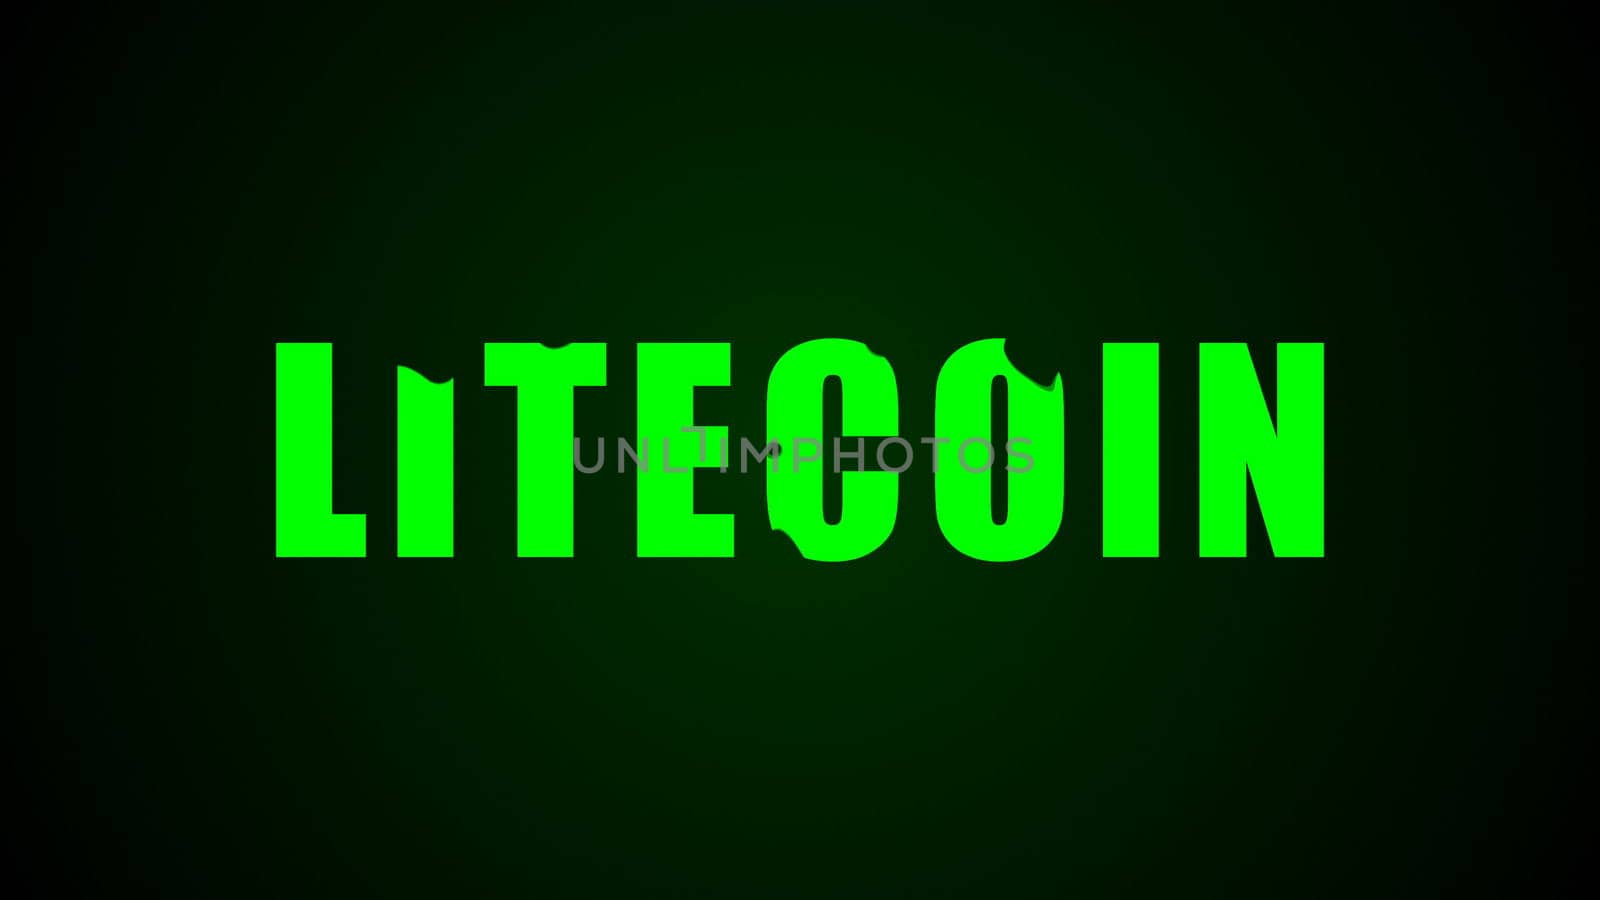 Litecoin text. Abstract background. Digital 3d rendering